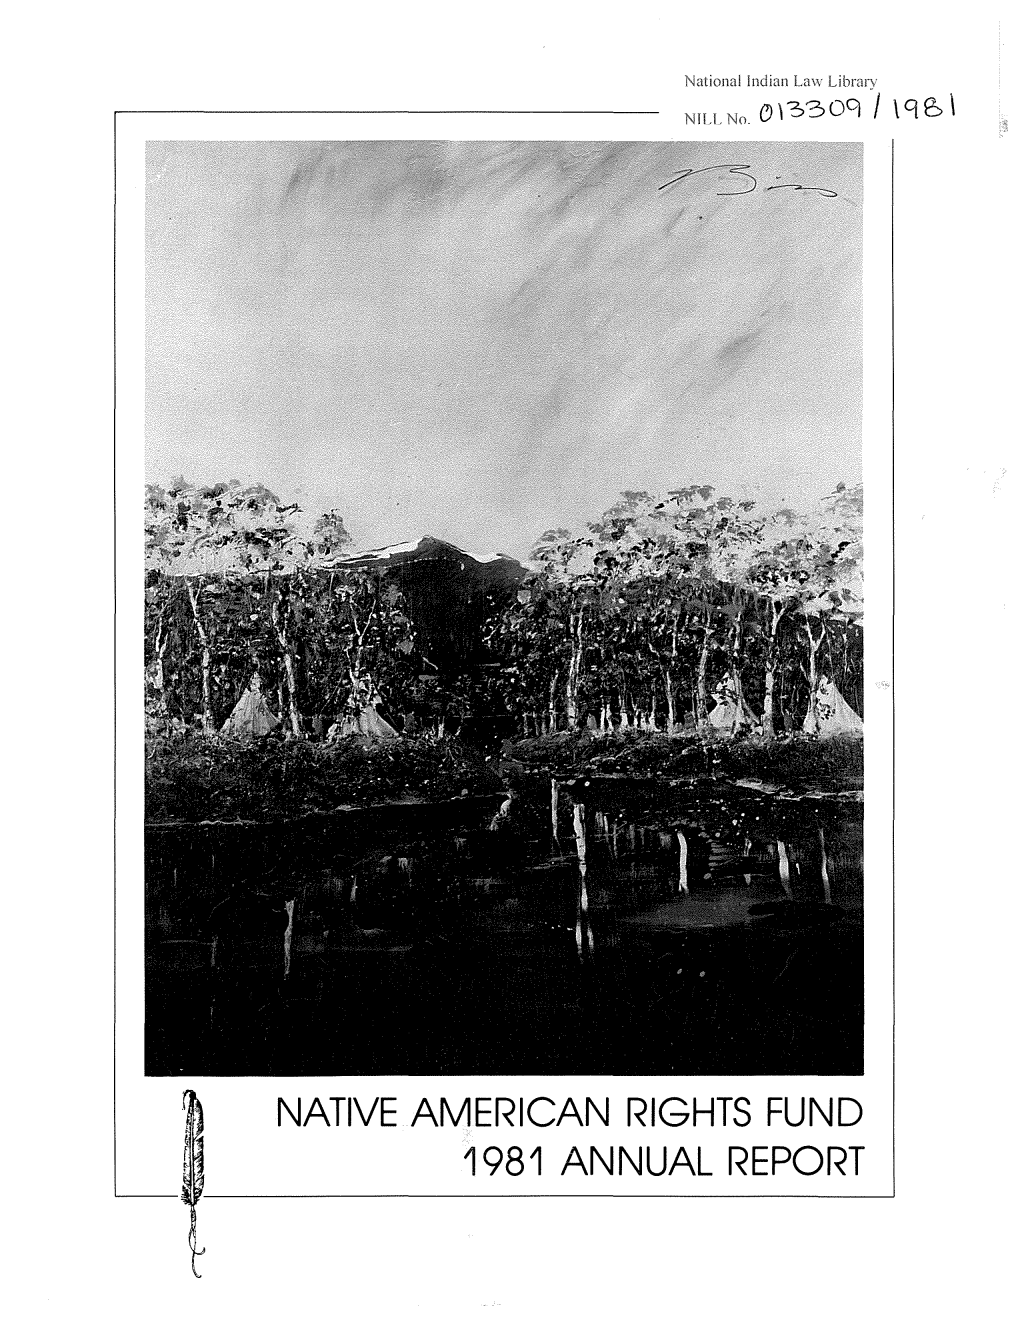 NATIVE AMERICAN RIGHTS FUND 1981 ANNUAL REPORT Steering Committee National Support Committee David Risling, Jr